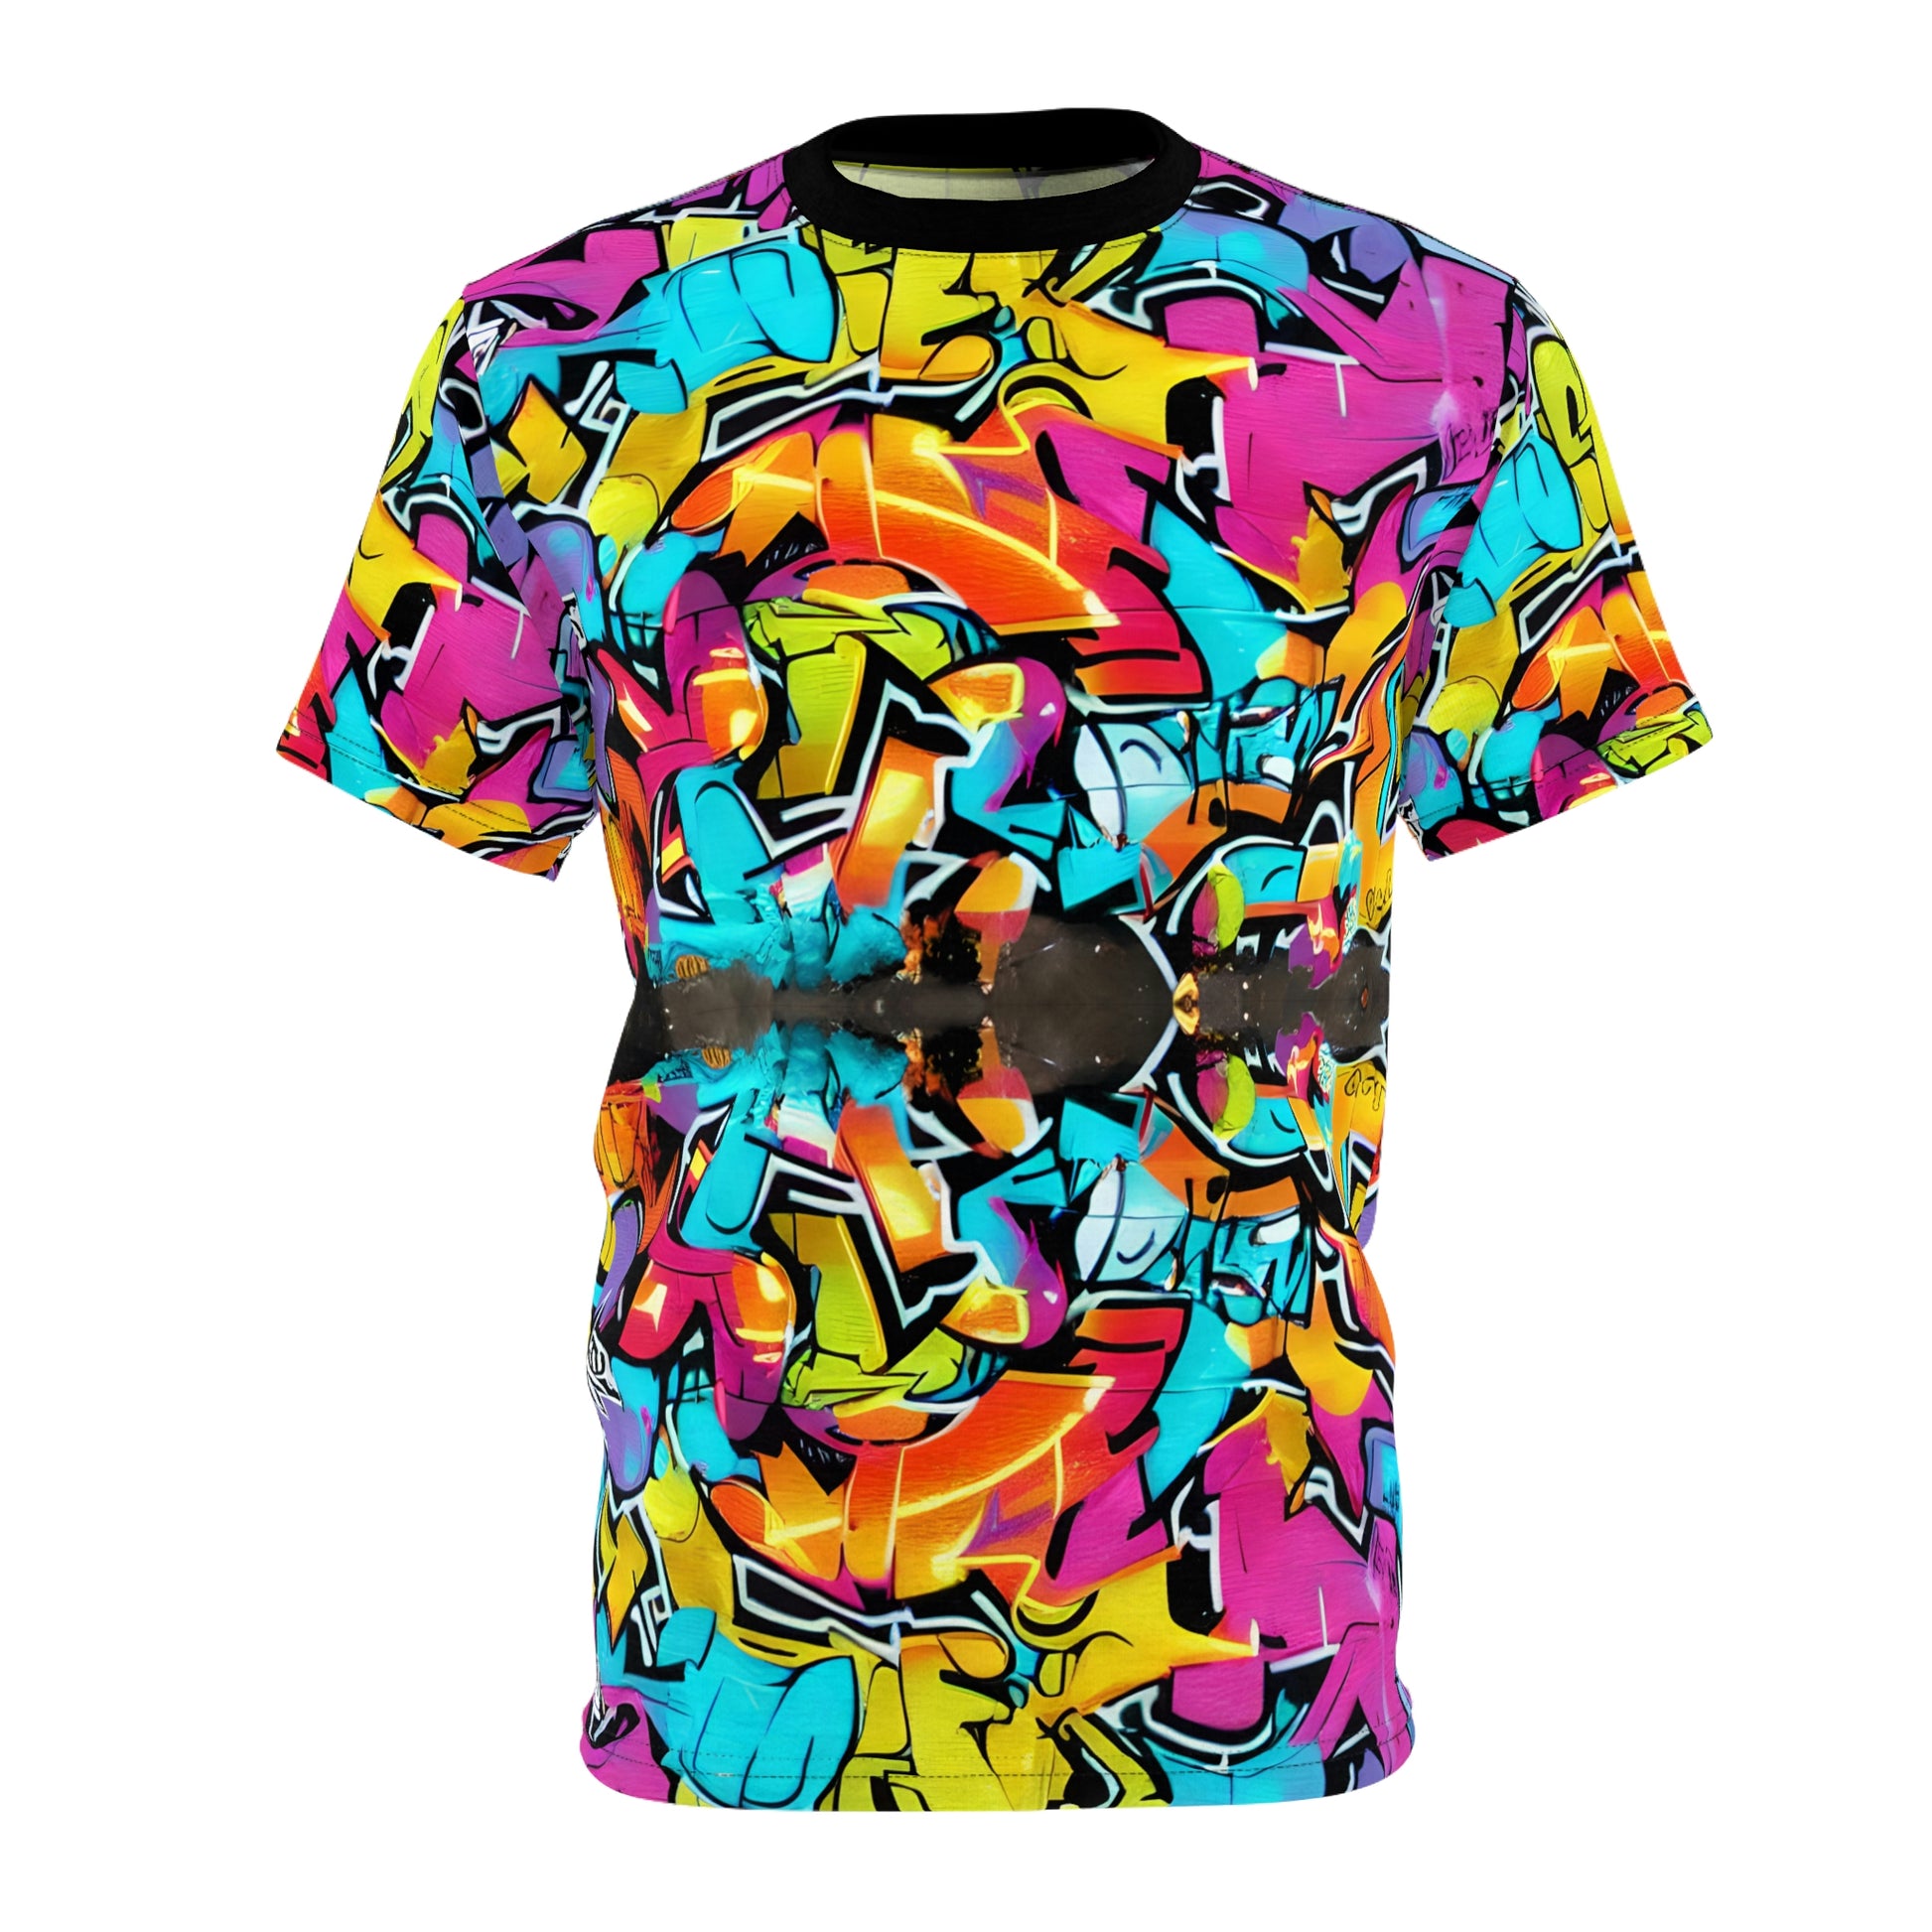 https://admin.shopify.com/store/d7654e/themes/147717095744/editor?previewPath=%2Fcollections%2Fprinted-shirts%2Fproducts%2F4th-of-july-style-abstract-style-unisex-cut-sew-tee-5